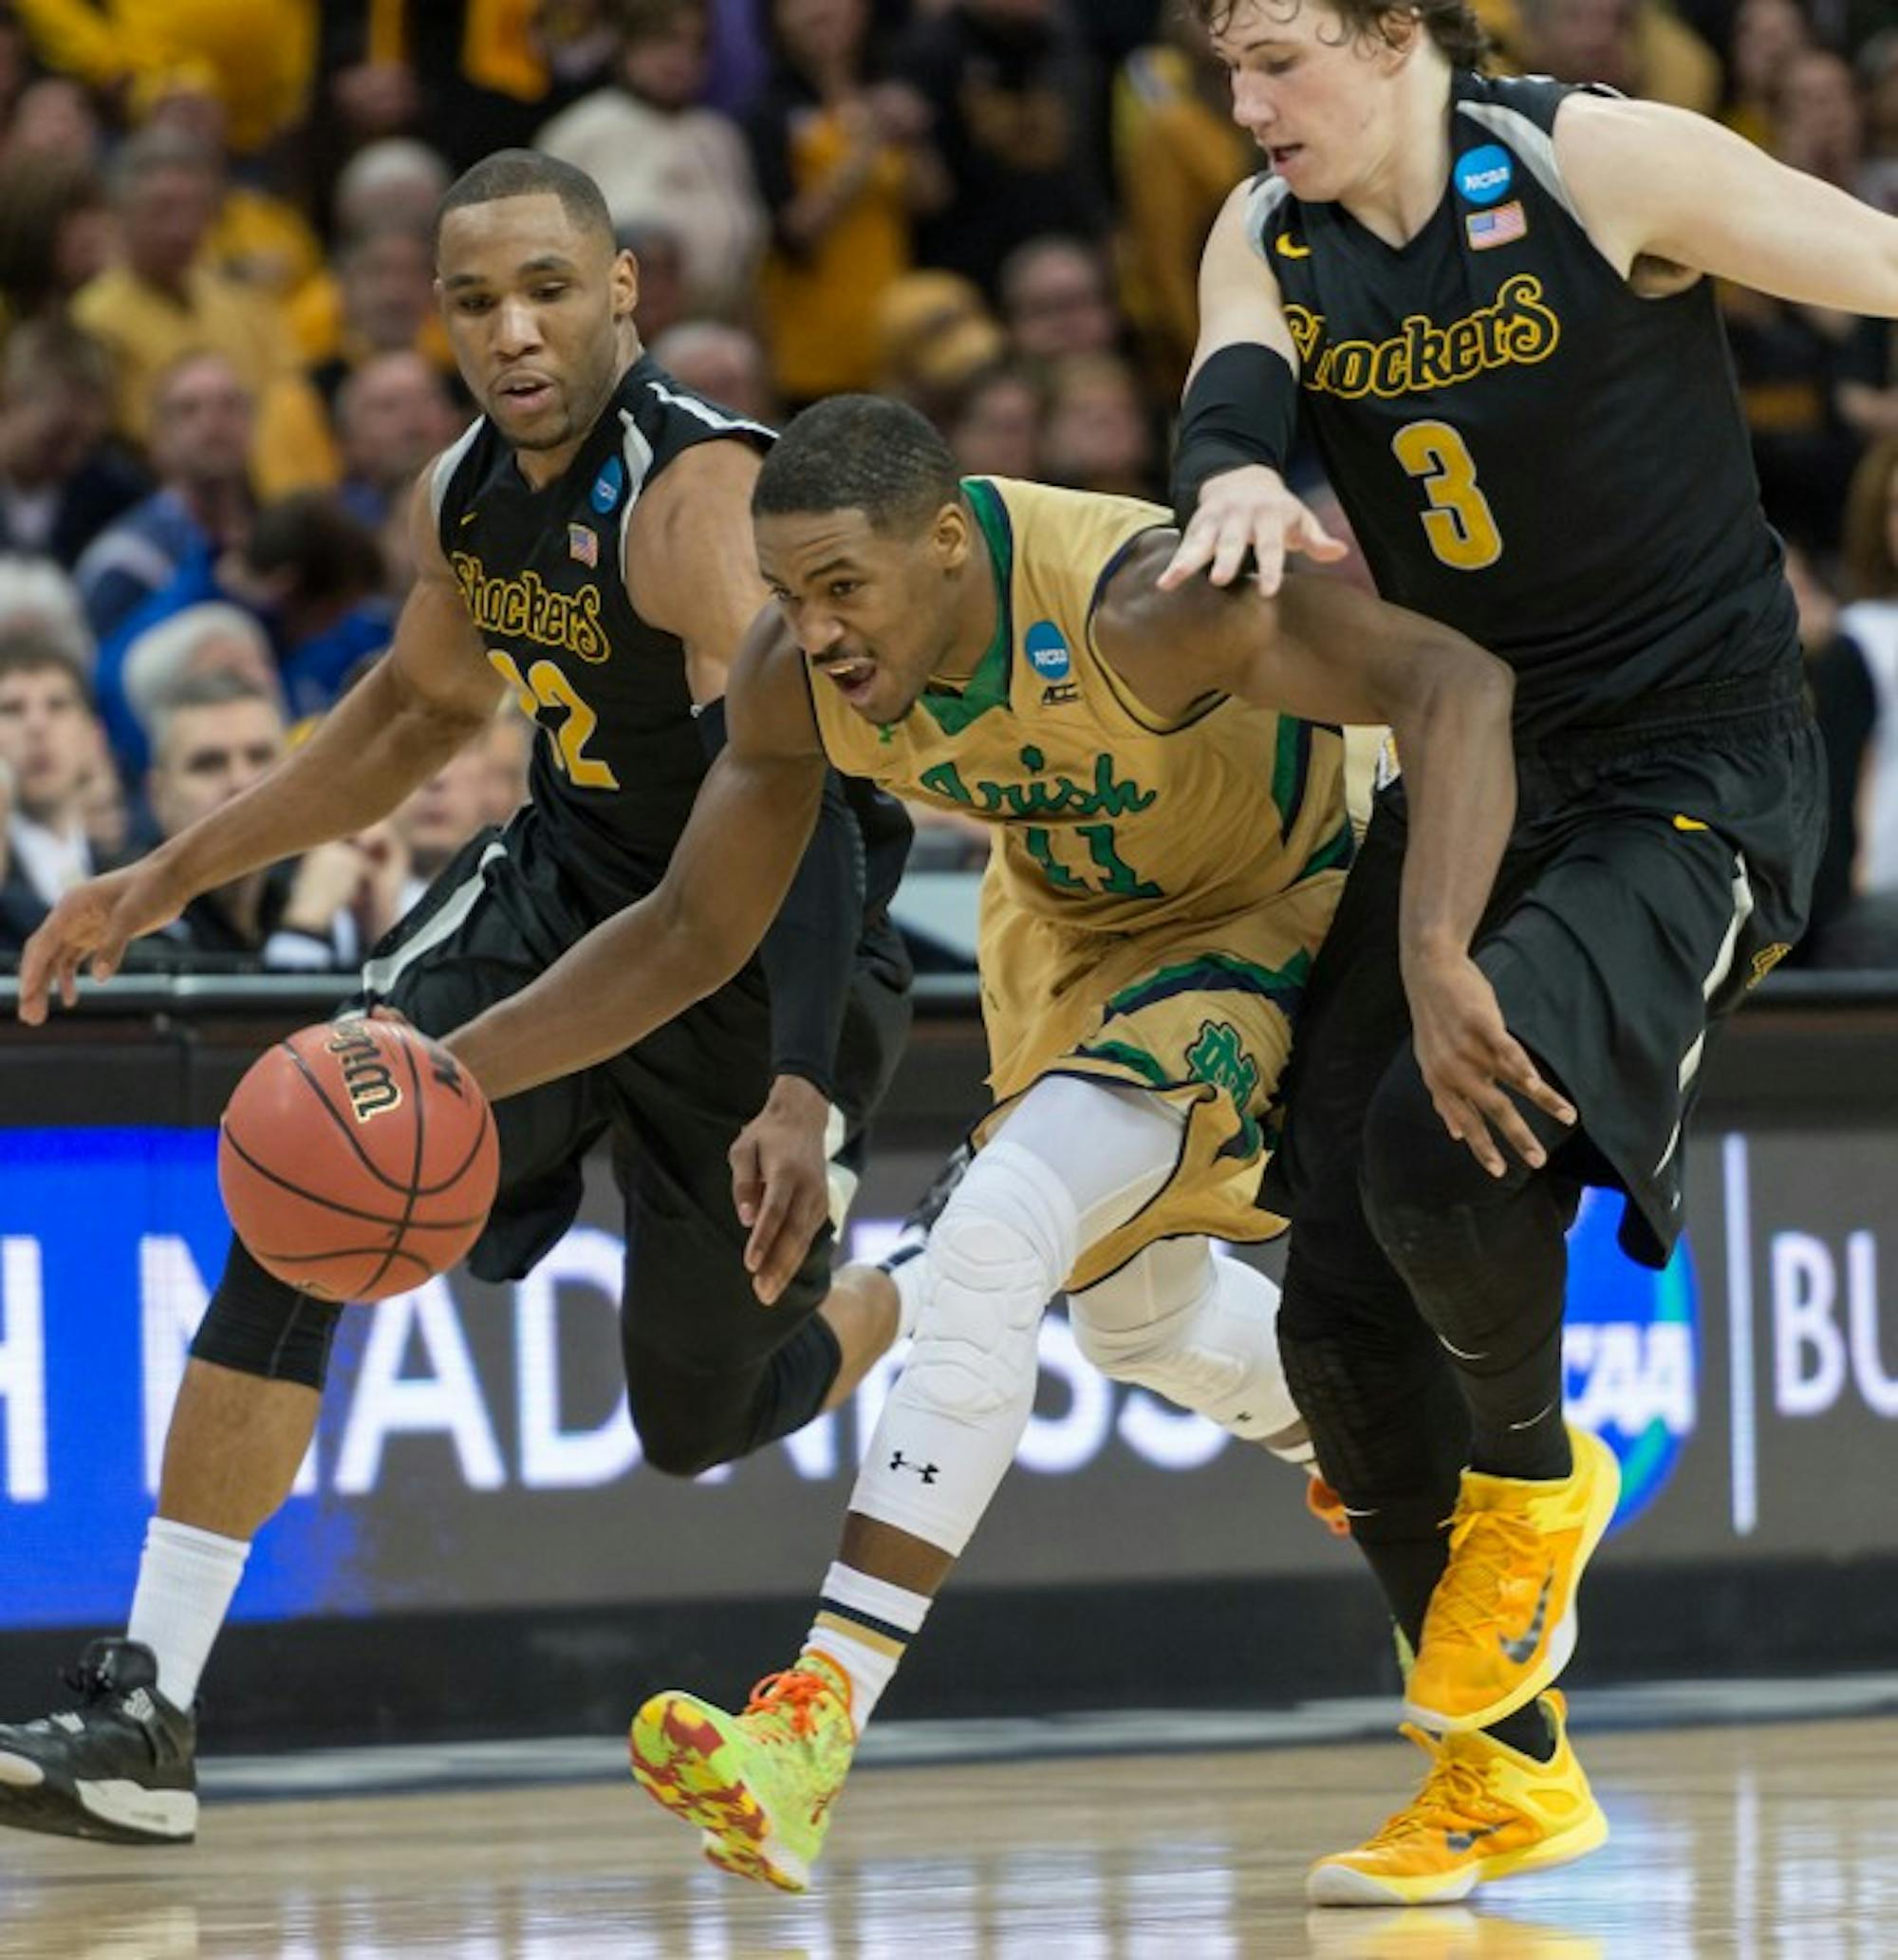 Irish sophomore guard Demetrius Jackson splits a pair of Wichita State defenders during Notre Dame's 81-70 victory in the Sweet 16.